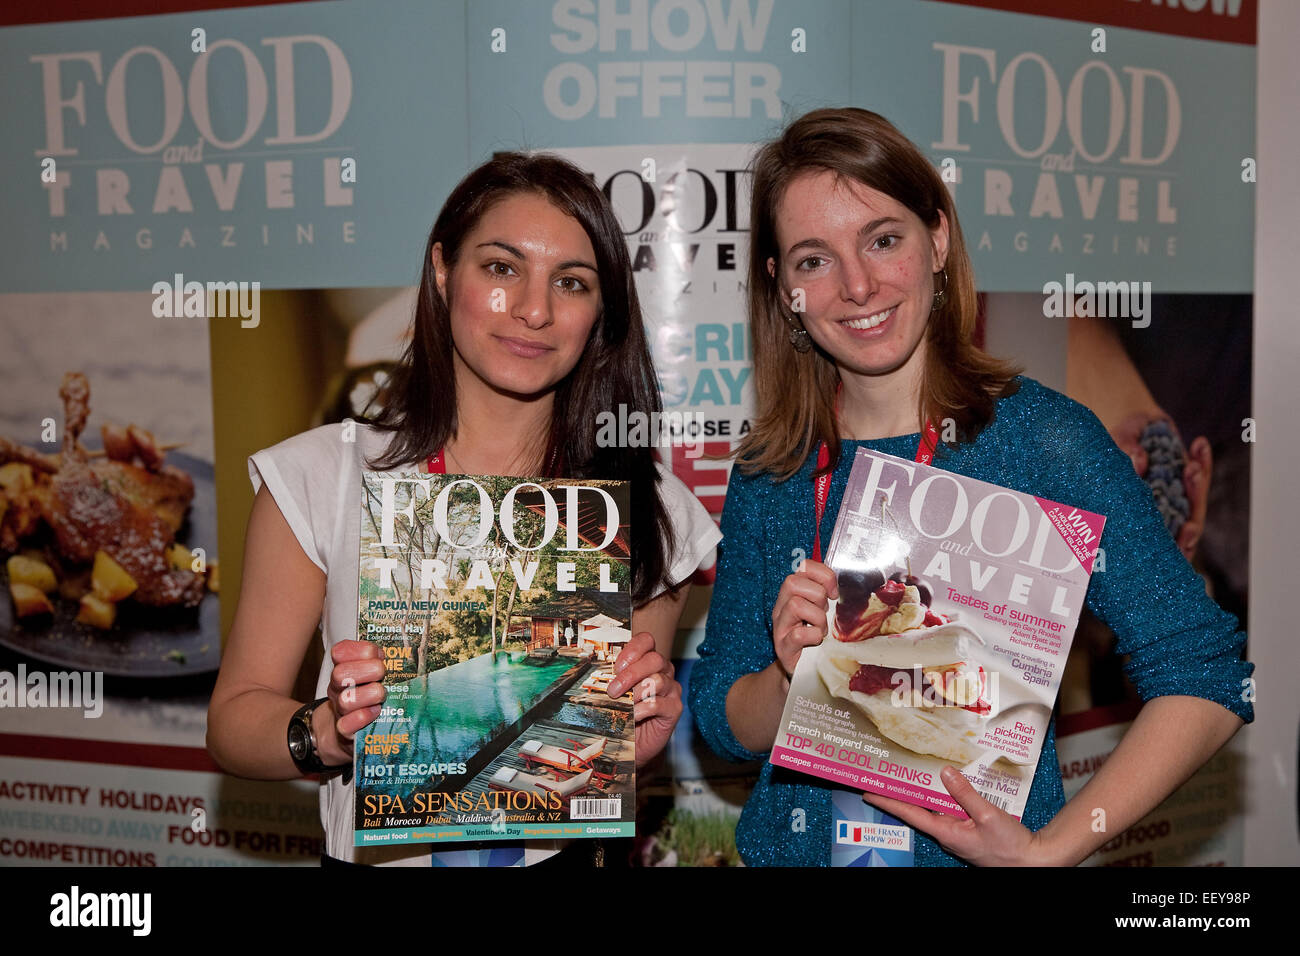 Food and travel magazine have a stall at the France Show 2015 in Olympia London Stock Photo